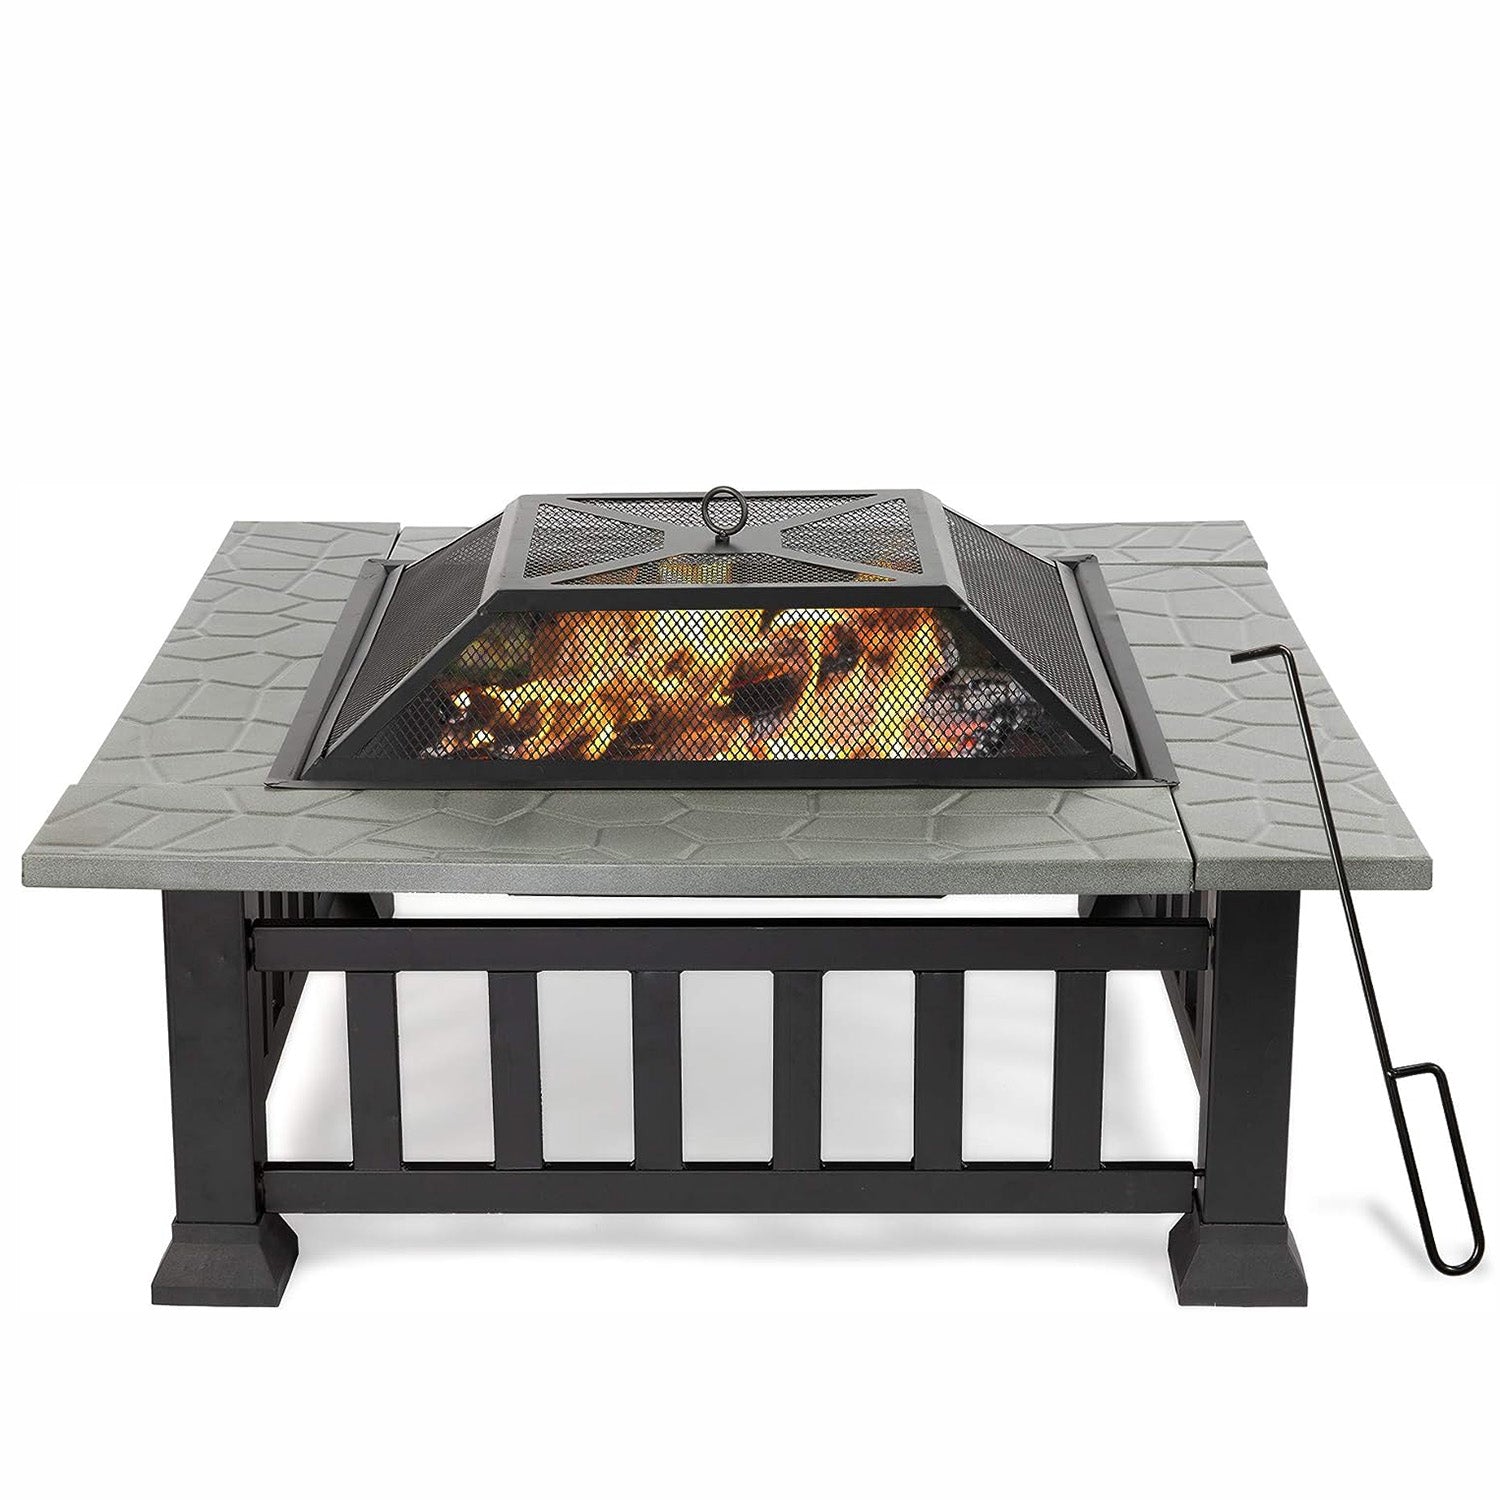 LUCKYERMORE 32” Outdoor Square Fire Pits Patio 4 in 1 Fire Pits for Heating Grilling Cooling Drinks & Food